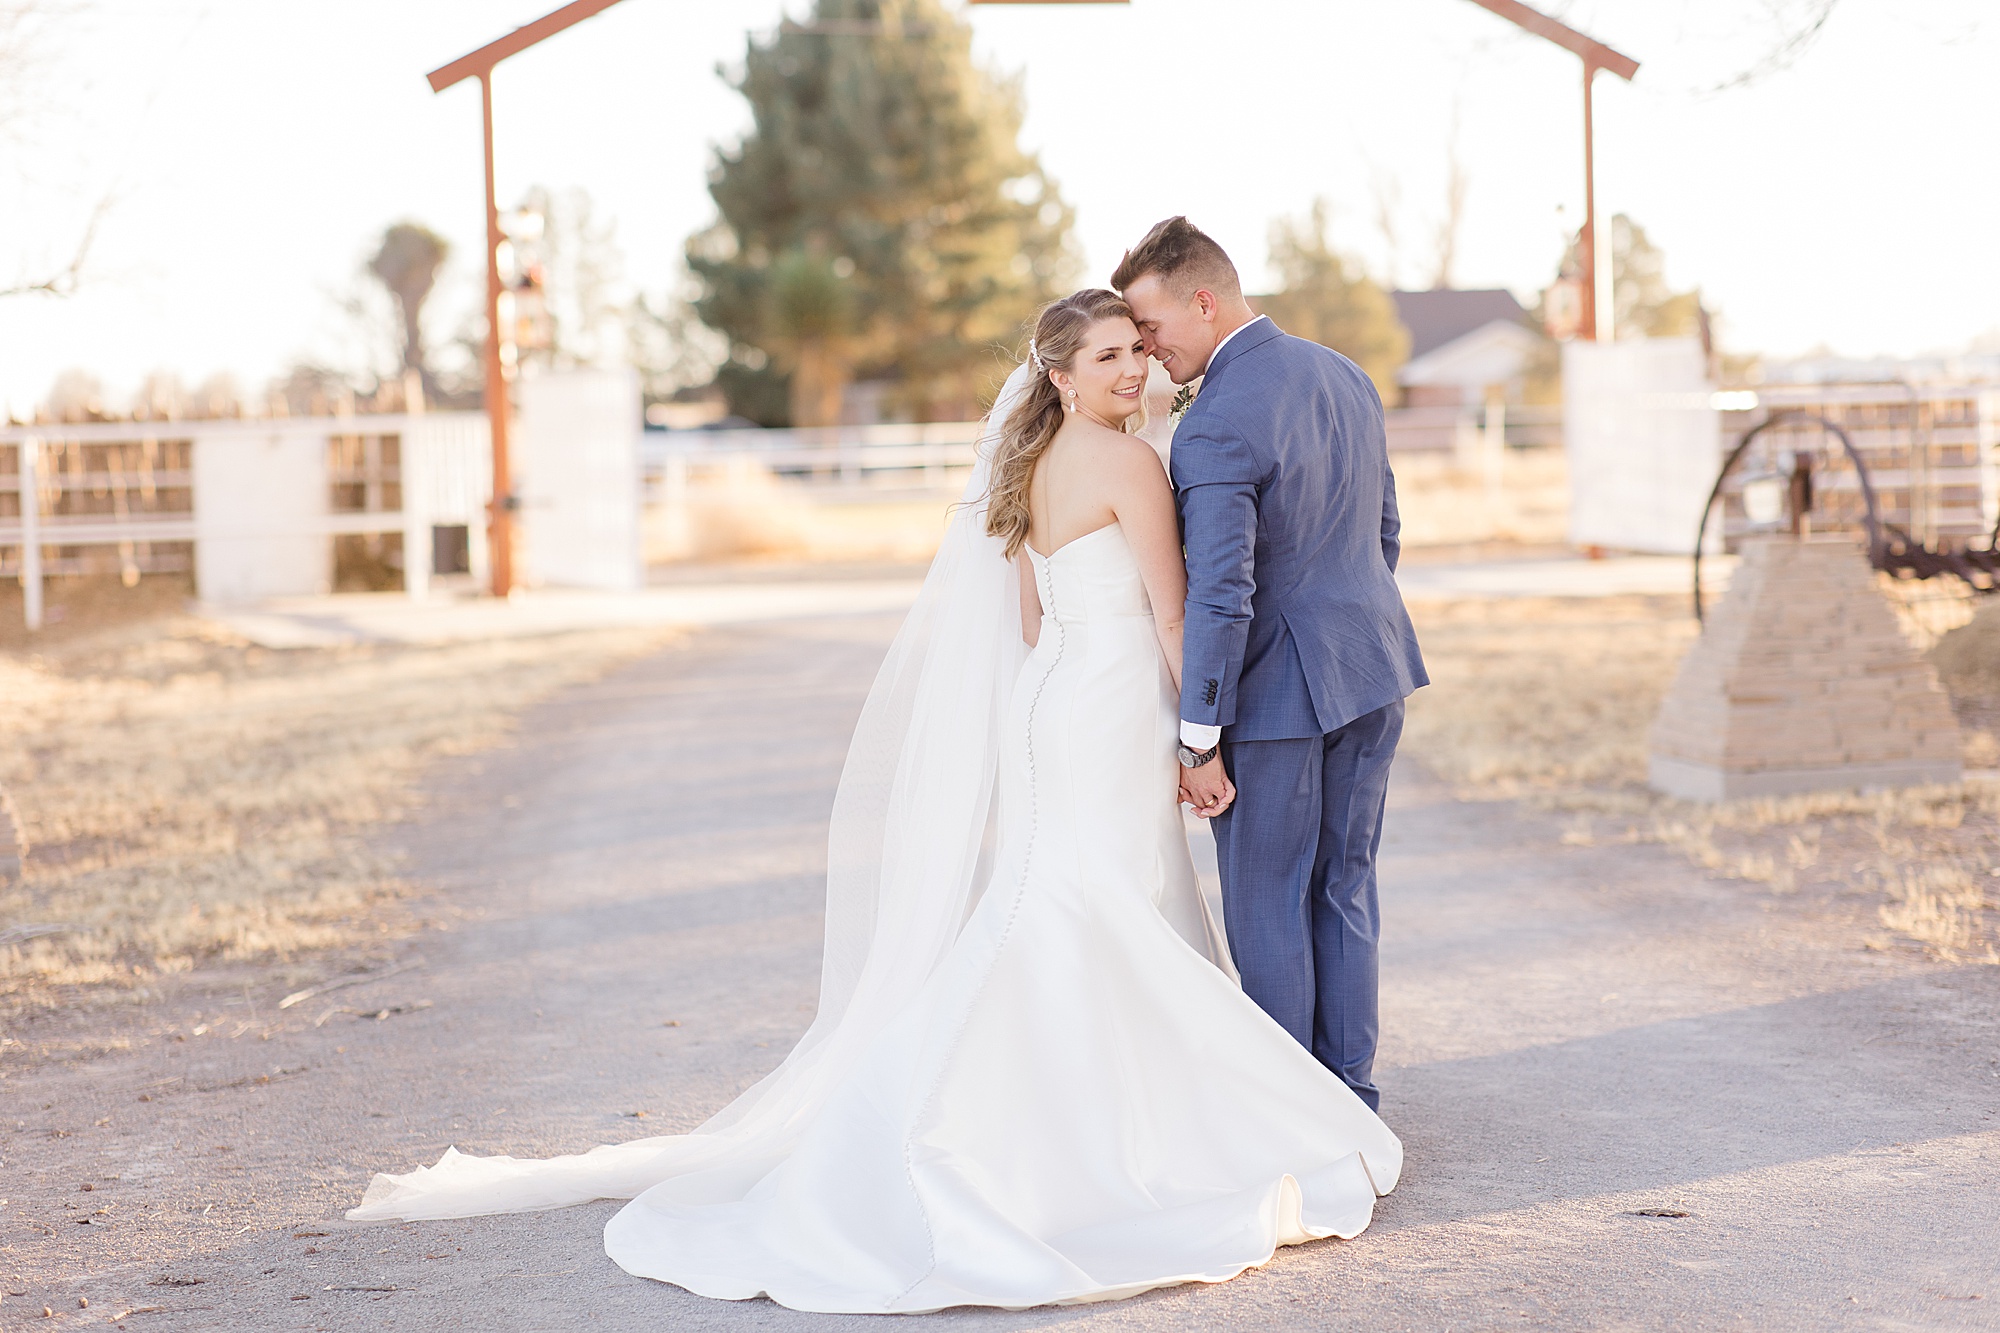 groom nuzzles bride's forehead during portraits on family farm in New Mexico